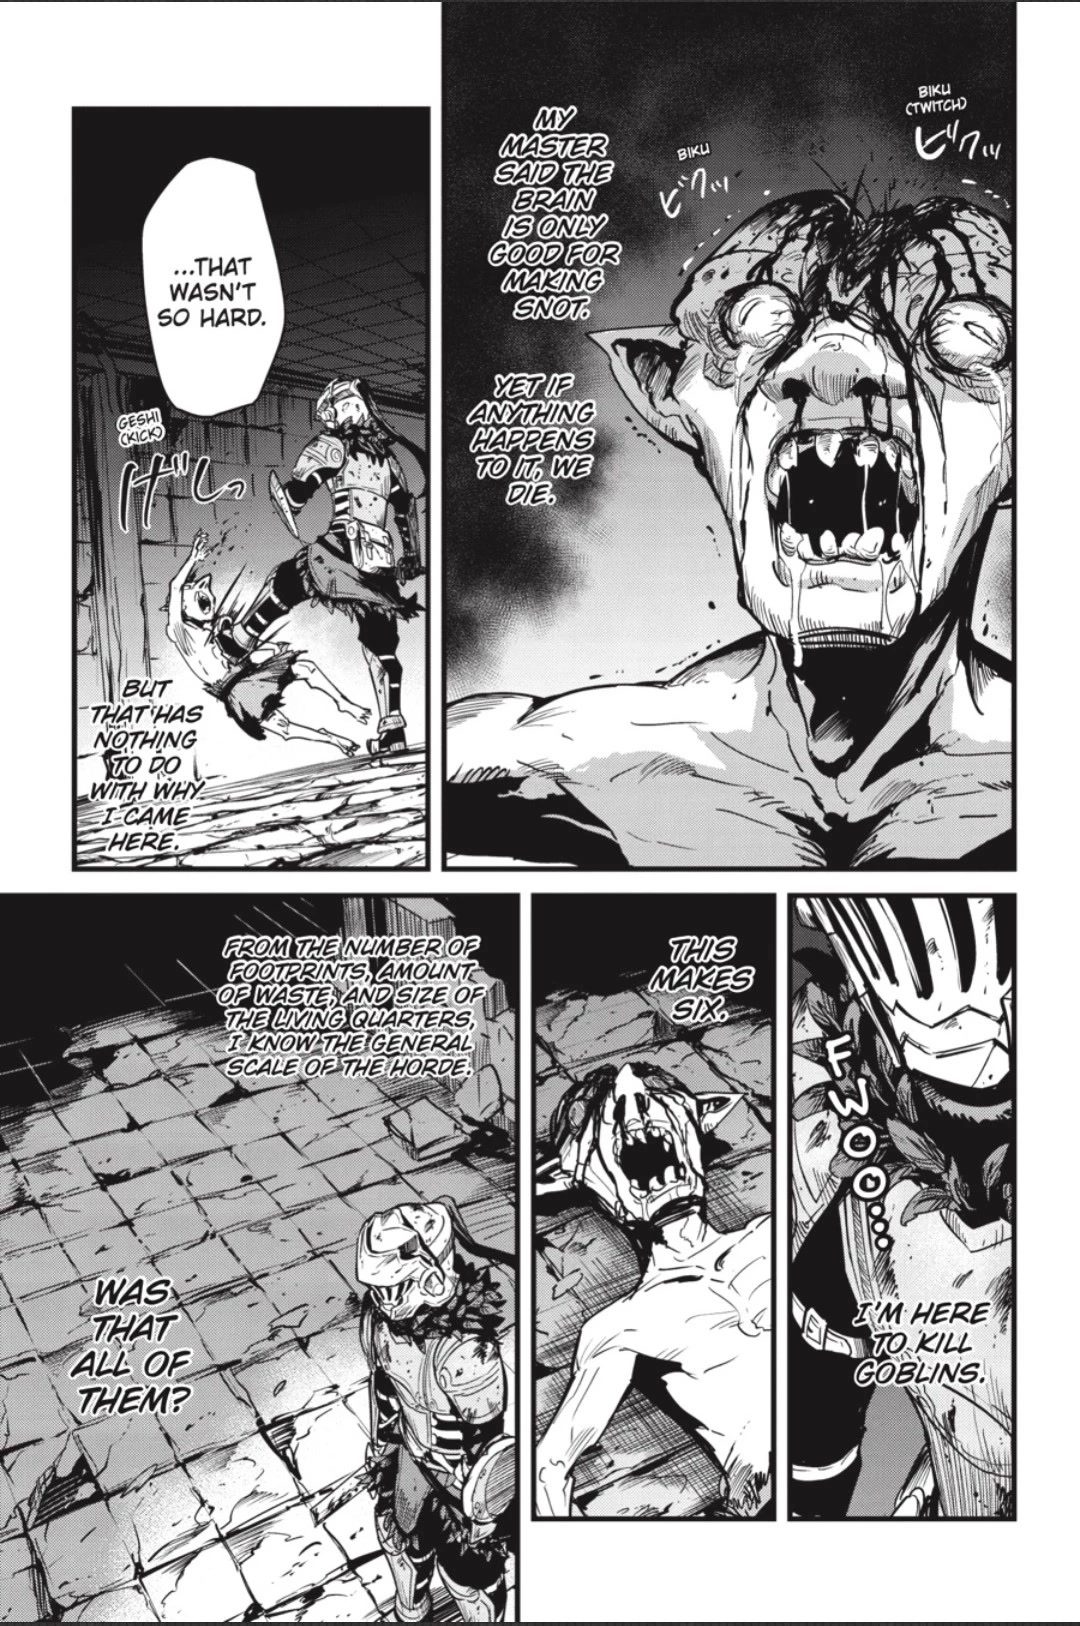 Goblin Slayer: Side Story Year One chapter 88